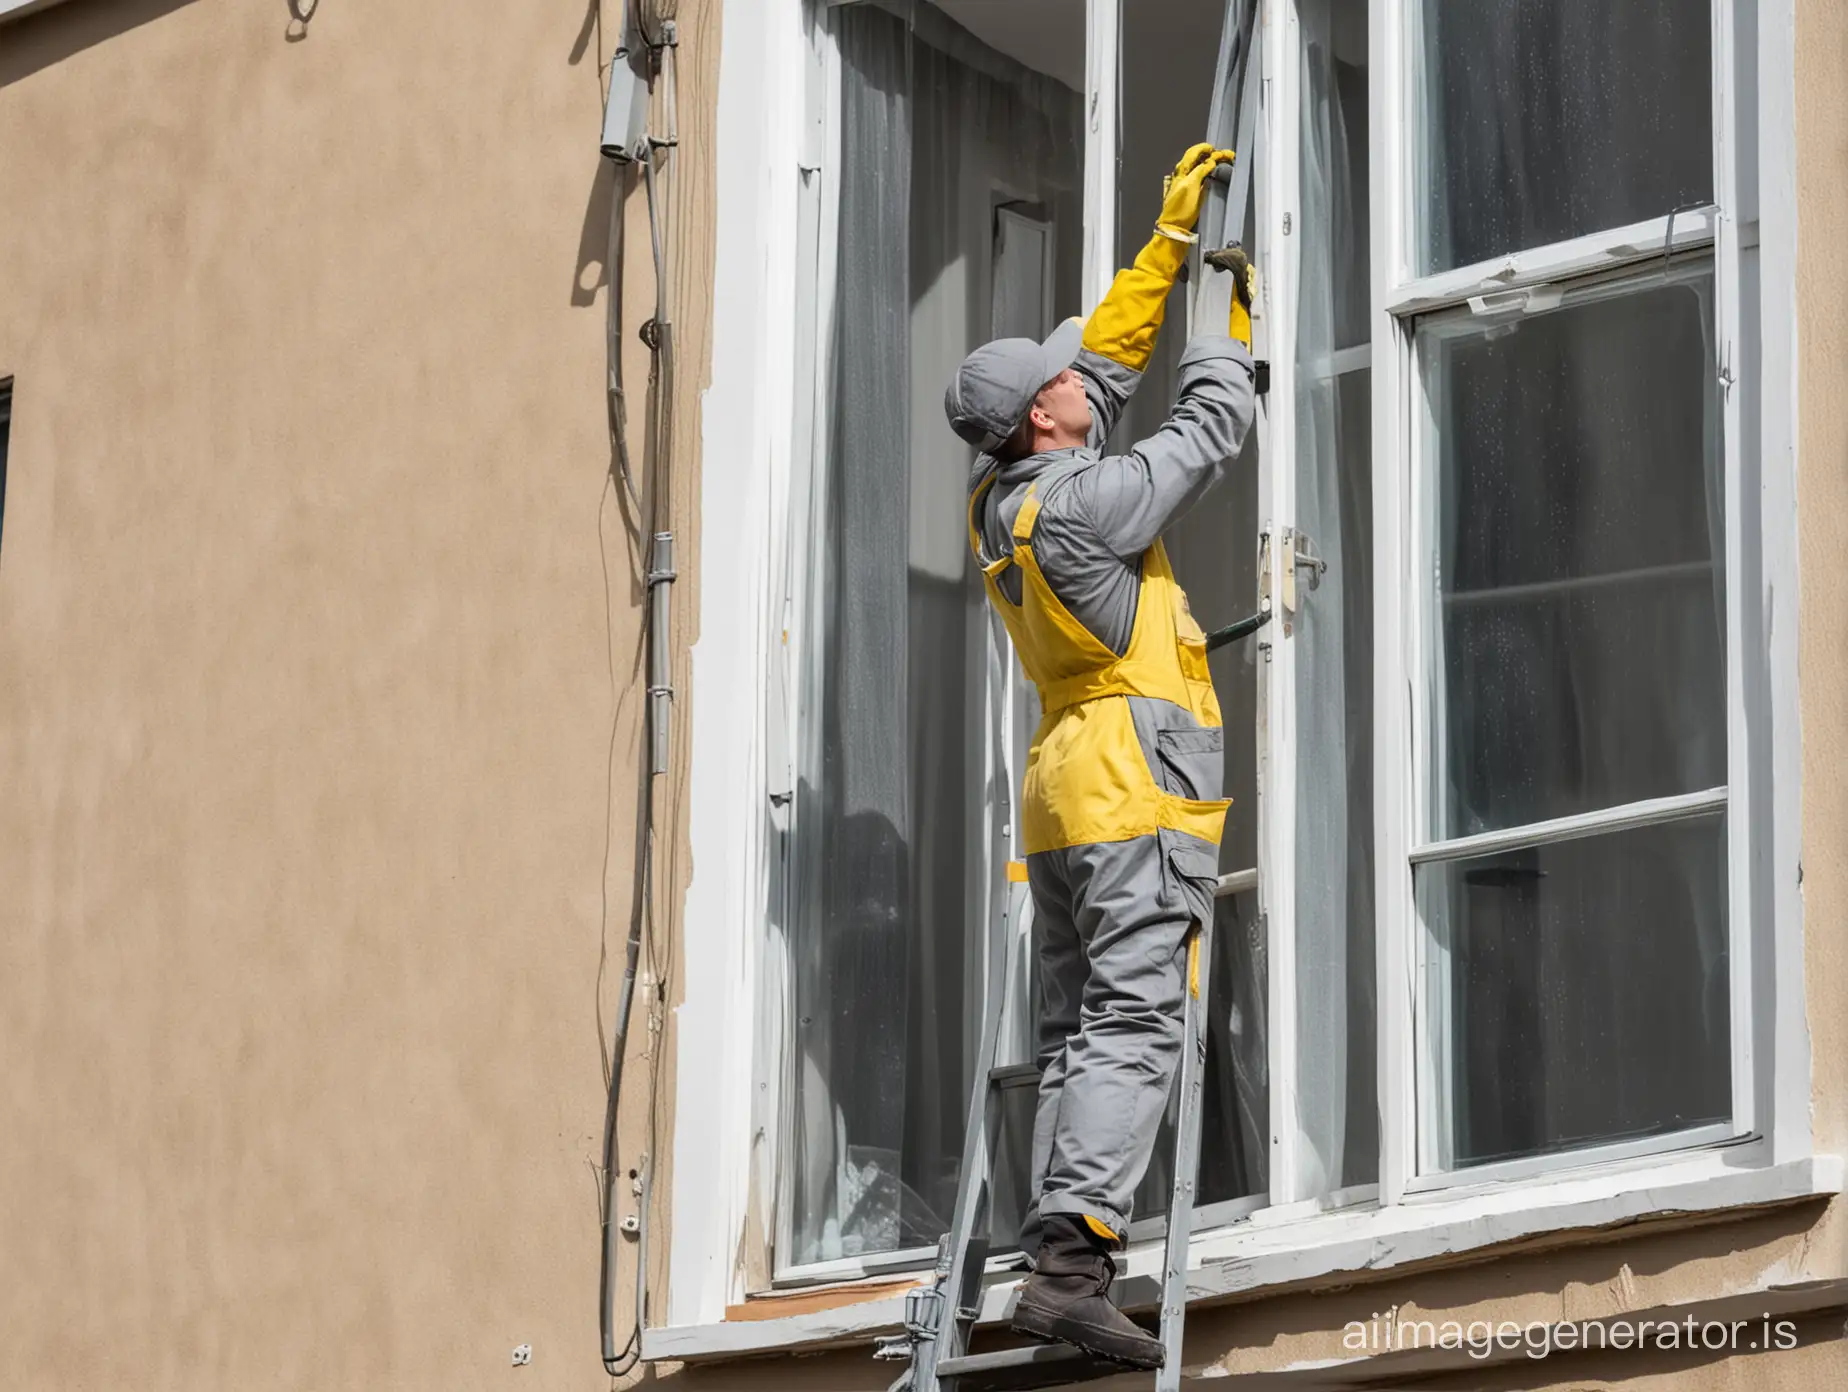 A man on the ladder in full height. Washing the window outside the house. Dressed in gray workwear. Wearing yellow gloves on hands.